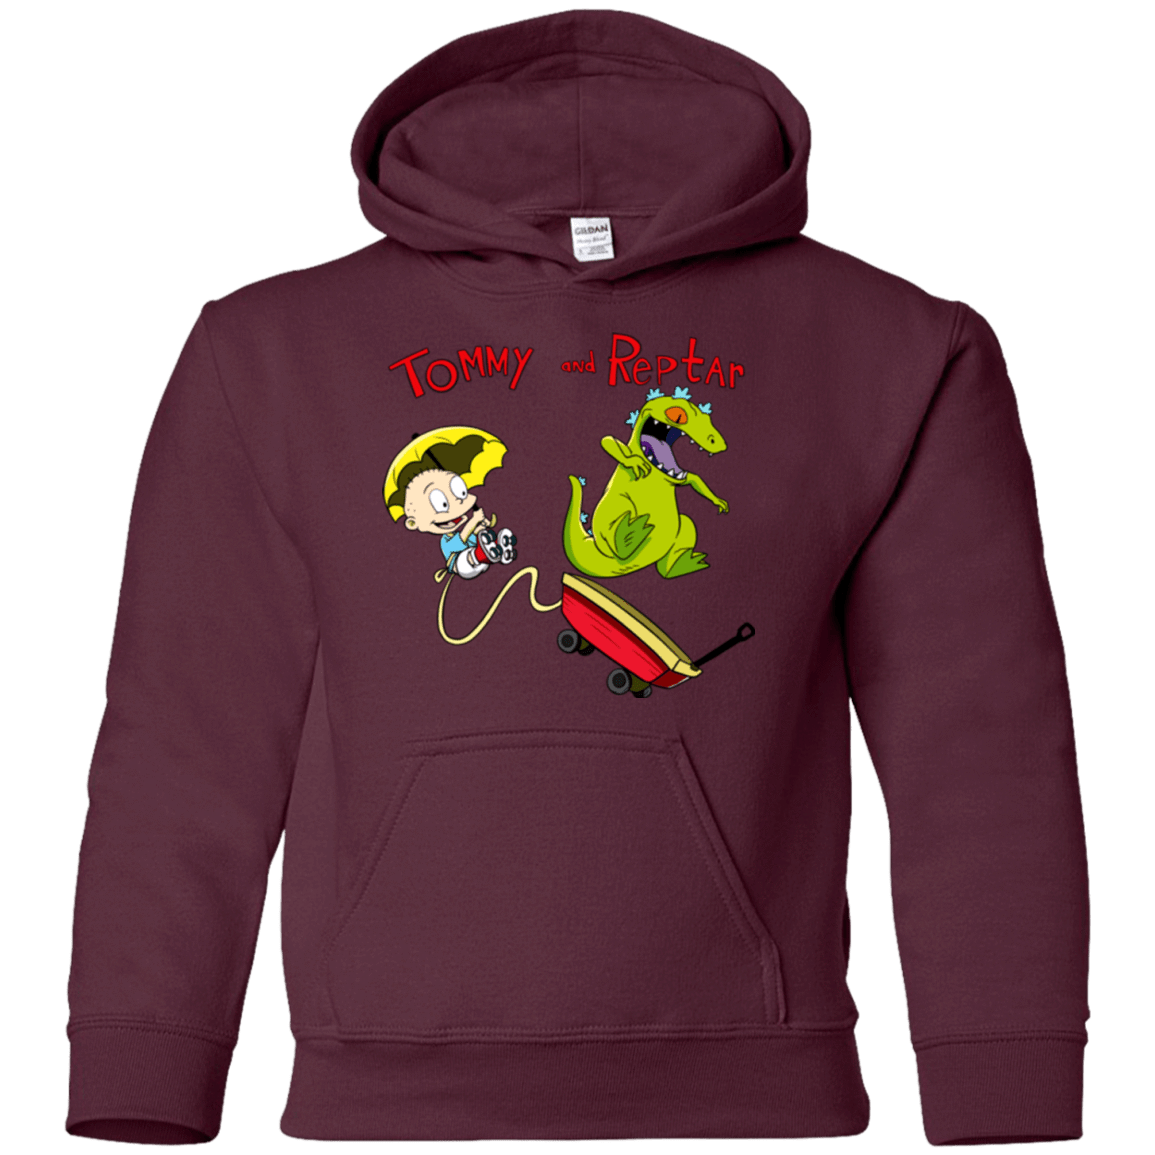 Sweatshirts Maroon / YS Tommy and Reptar Youth Hoodie